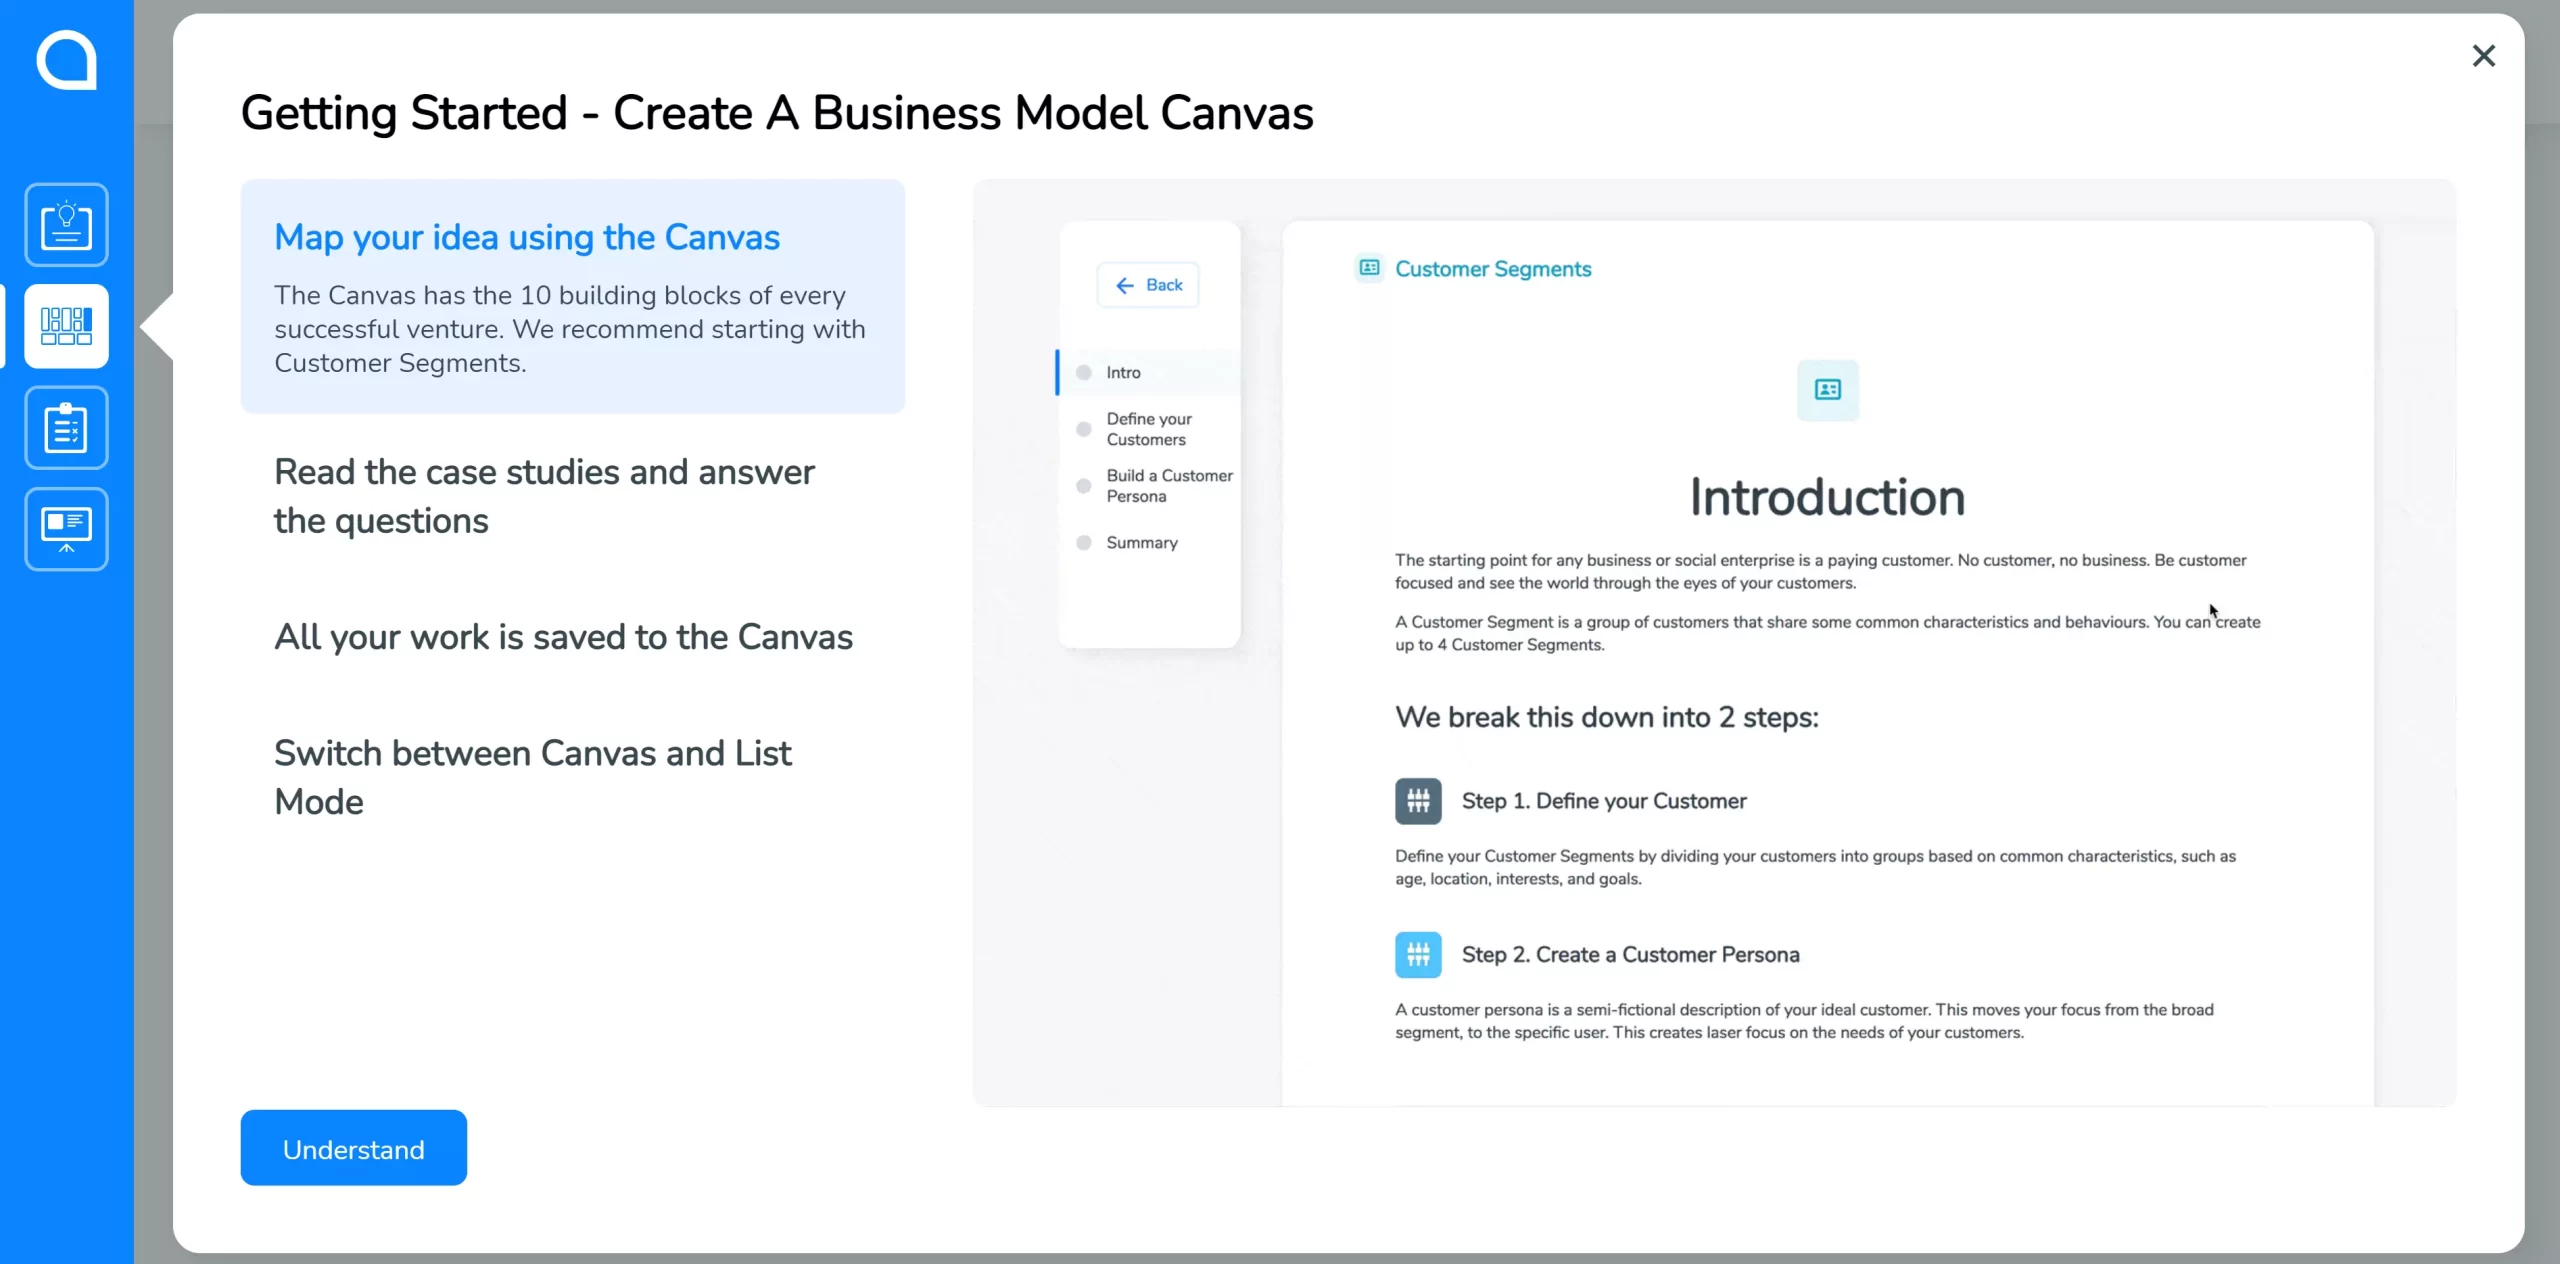 Start with Business Model Canvas in SimVenture Validate when you first log in.